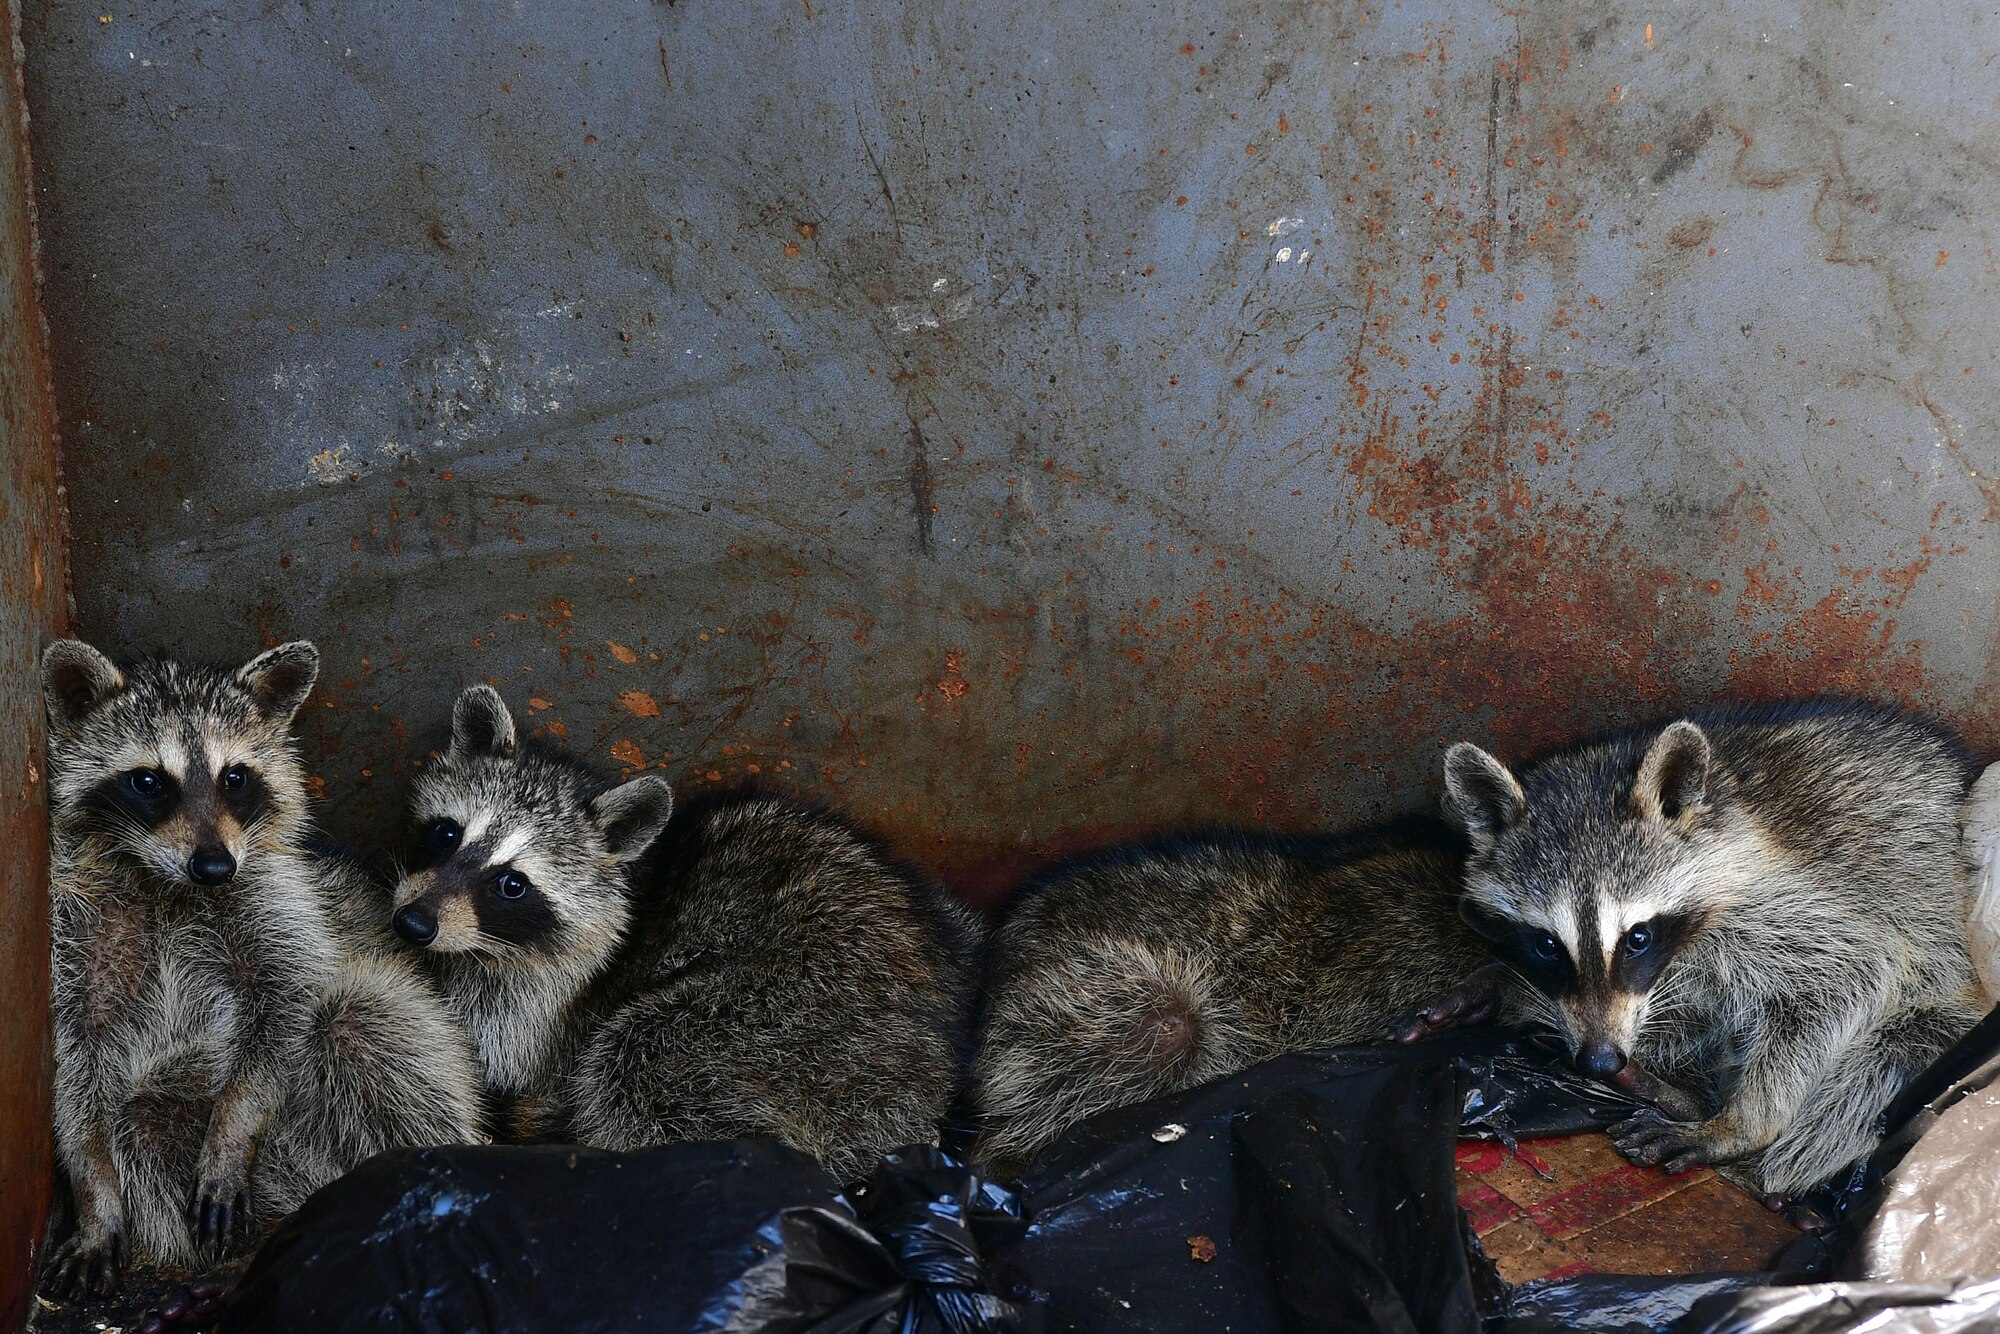 Raccoons huddle in the corner of a dumpster.